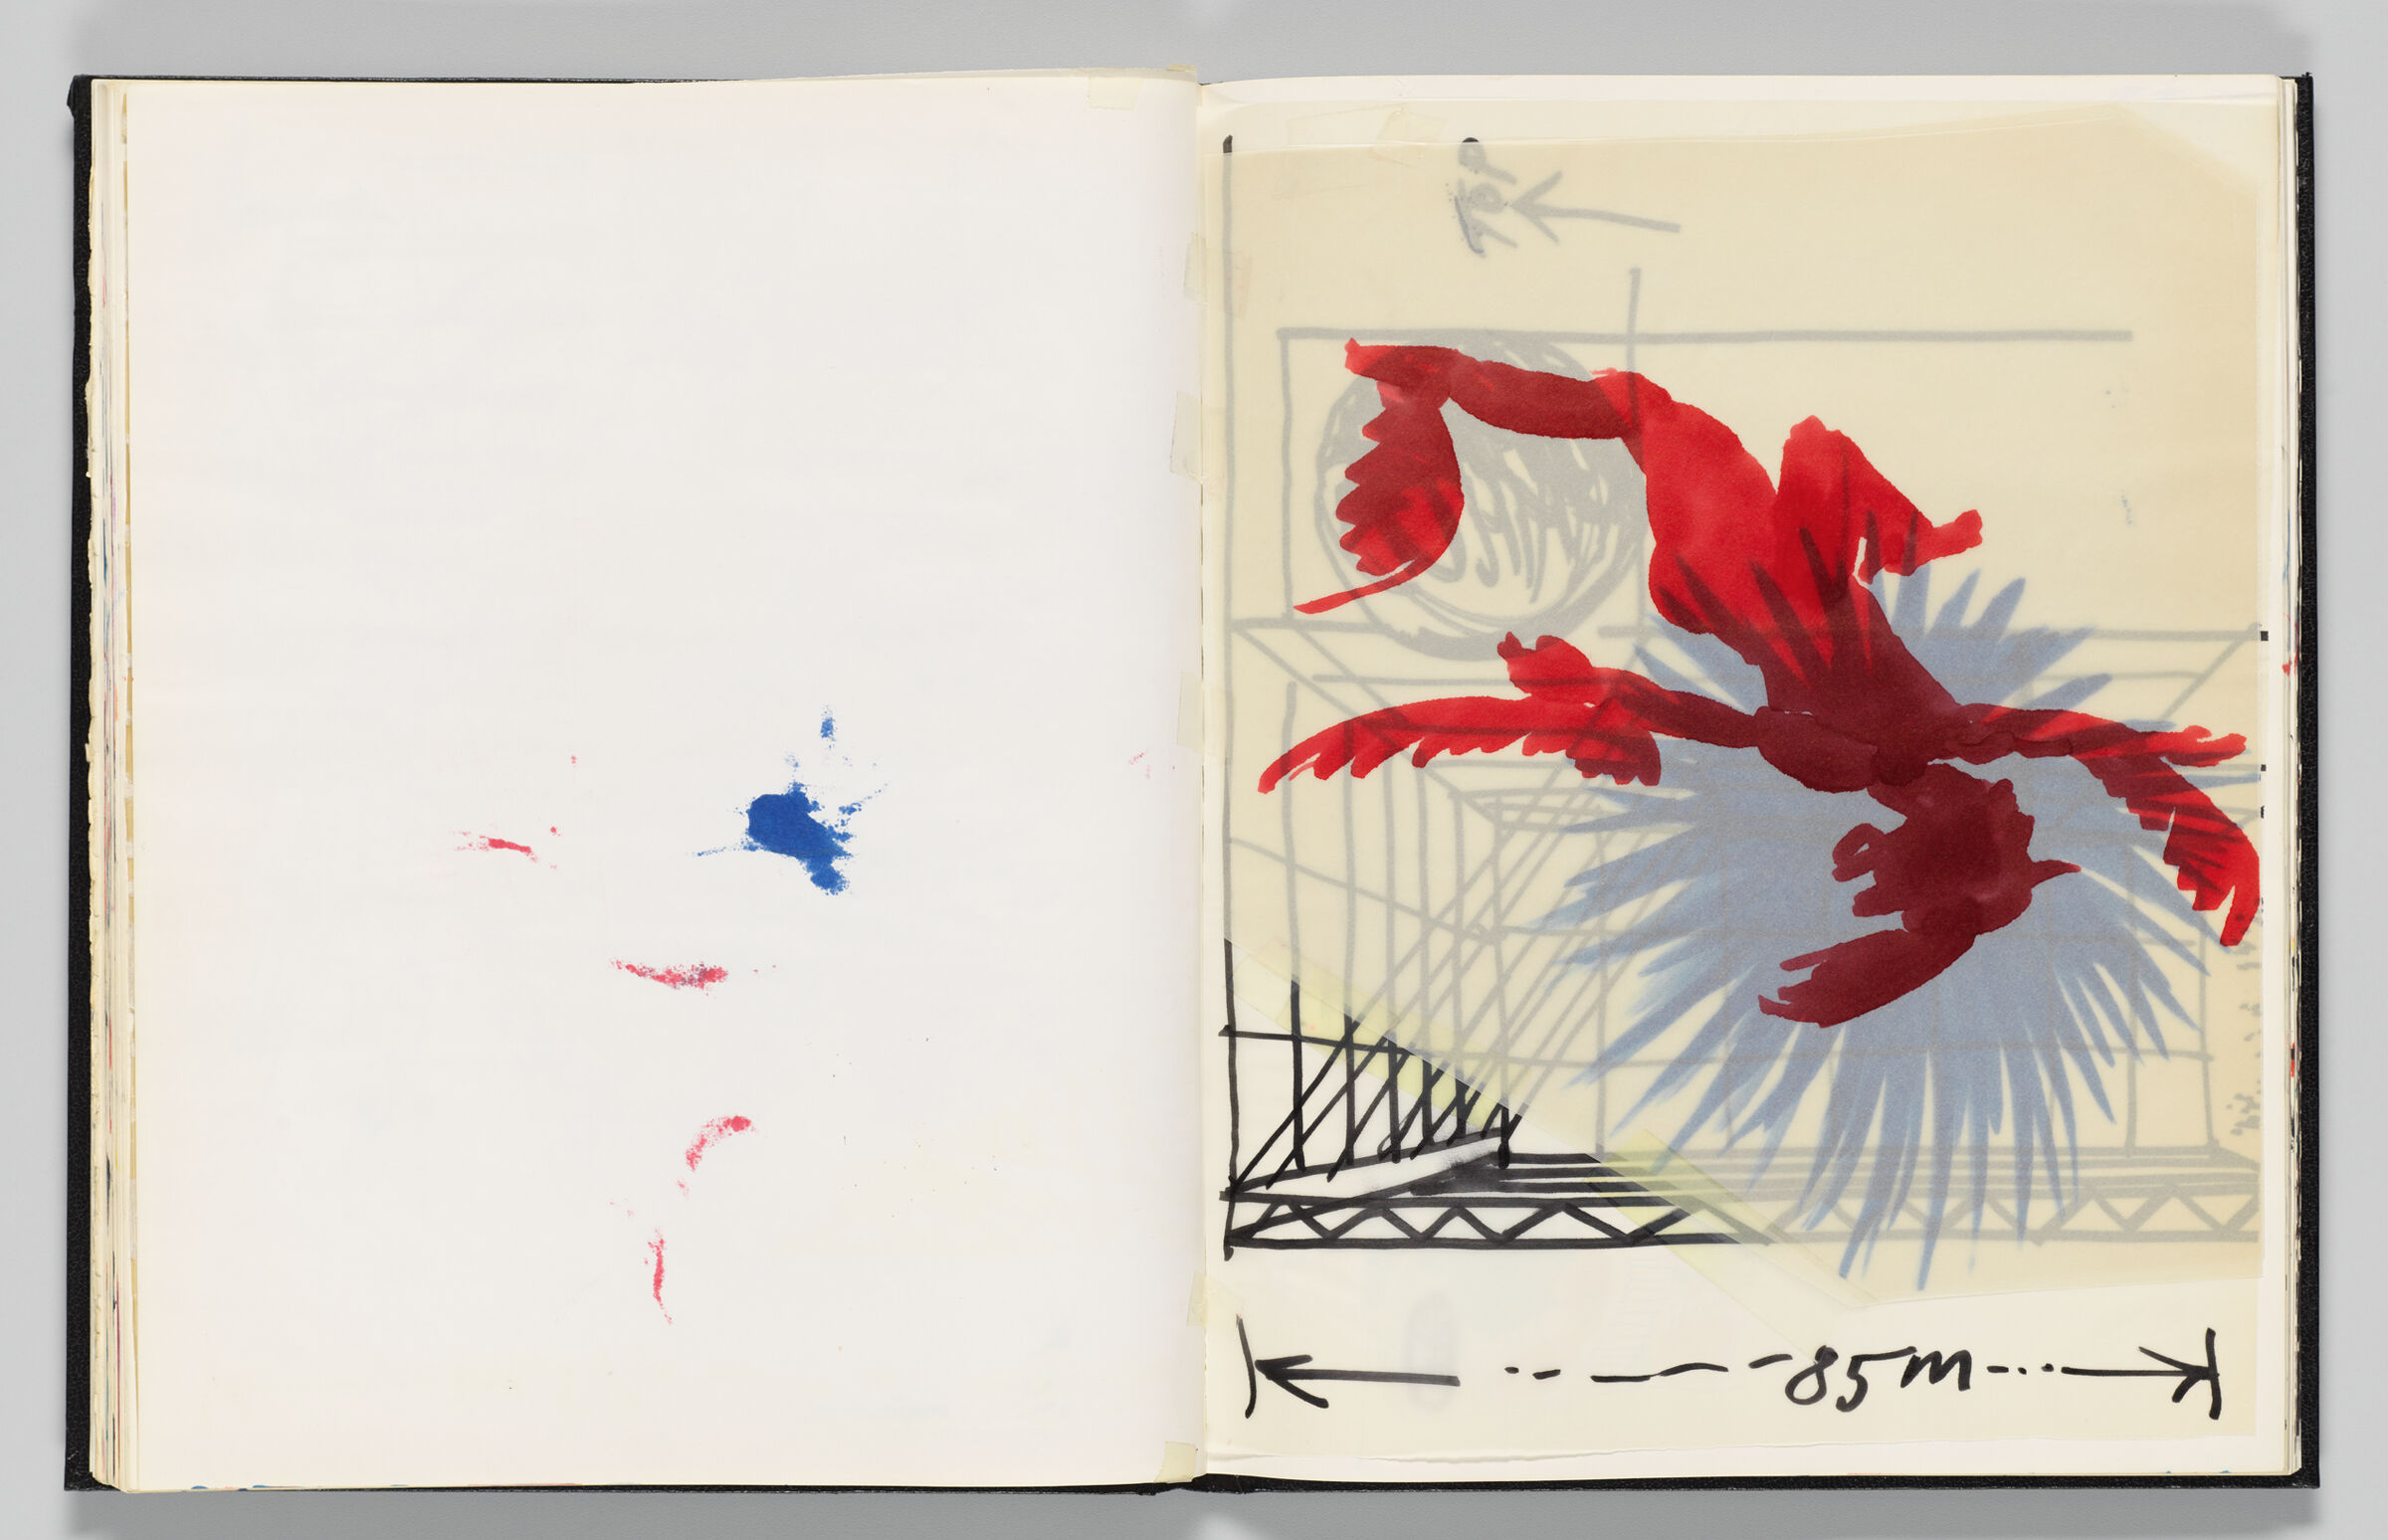 Untitled (Color Transfer, Left Page); Untitled (Adhered Sketches On Transparent Paper, Right Page)